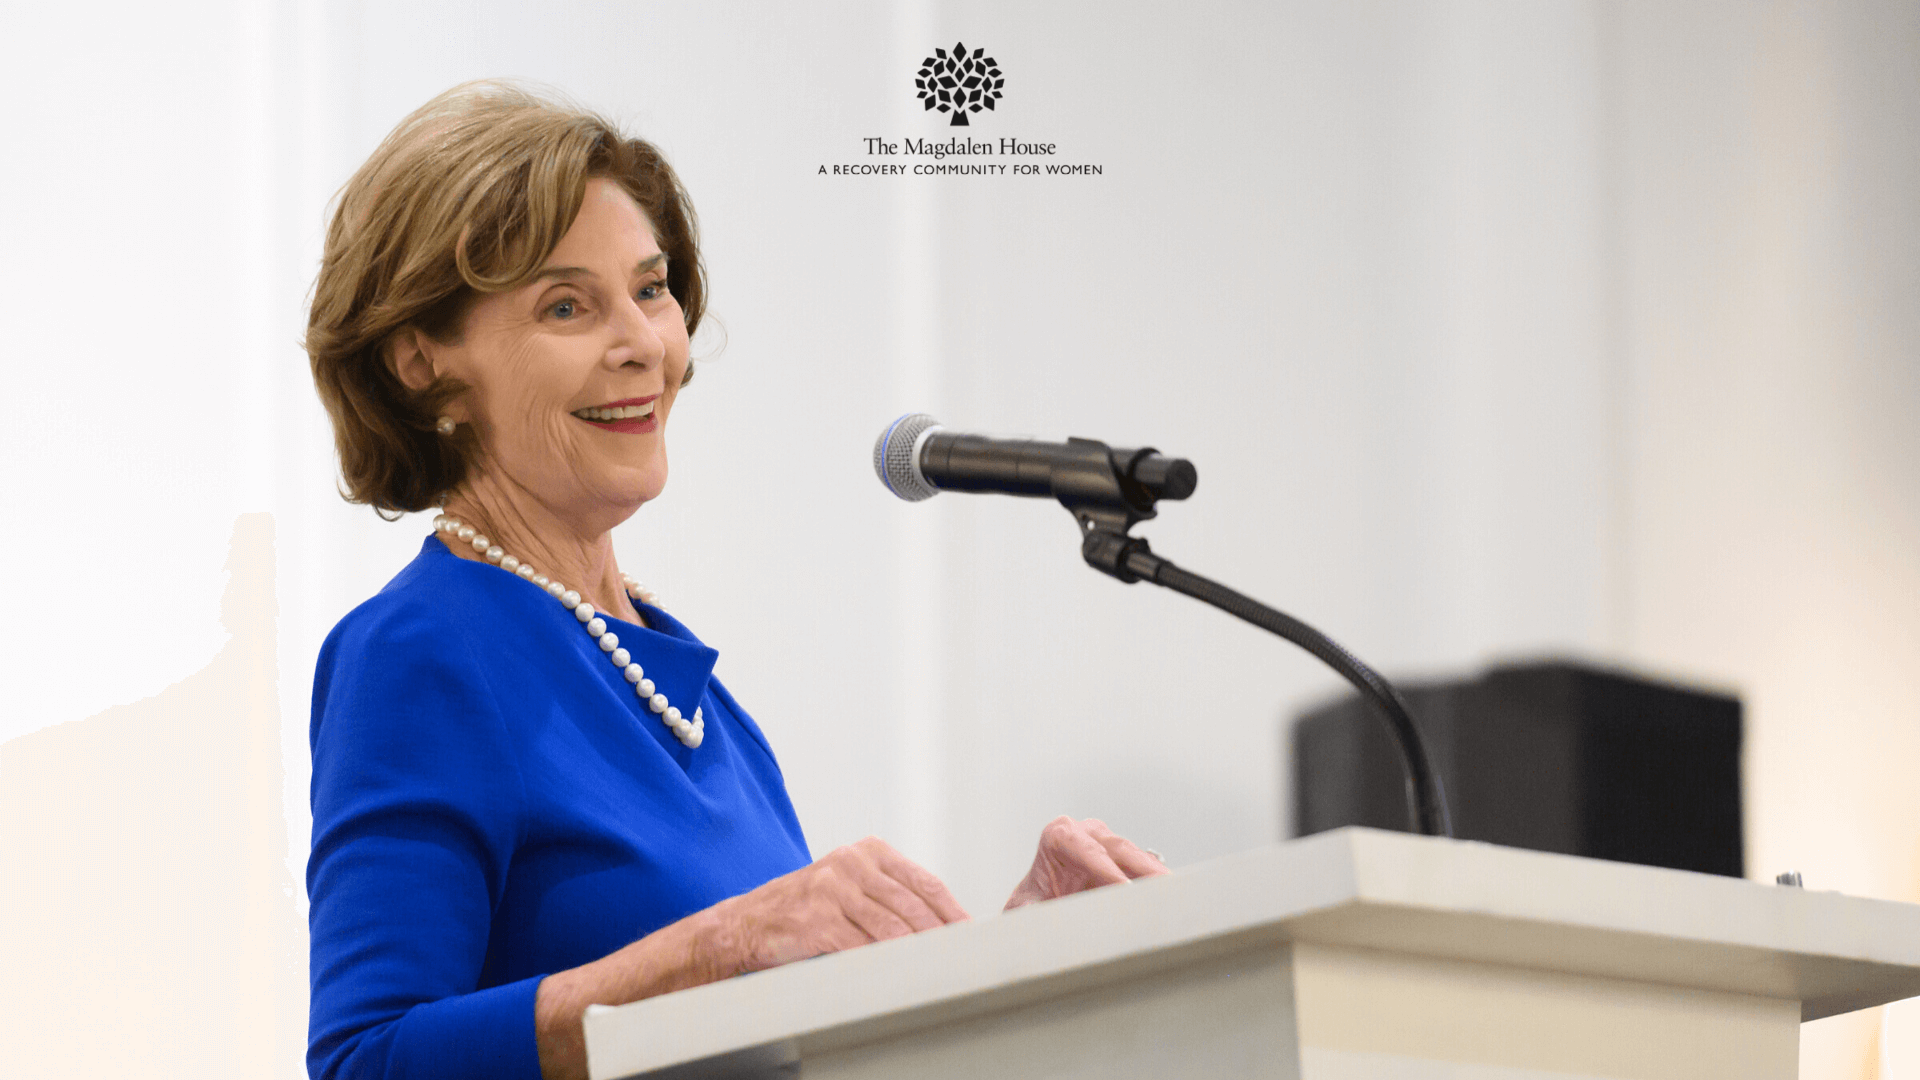 Leave a Legacy Dinner with Former First Lady Mrs. Laura Bush | The Magdalen House Dallas, Texas